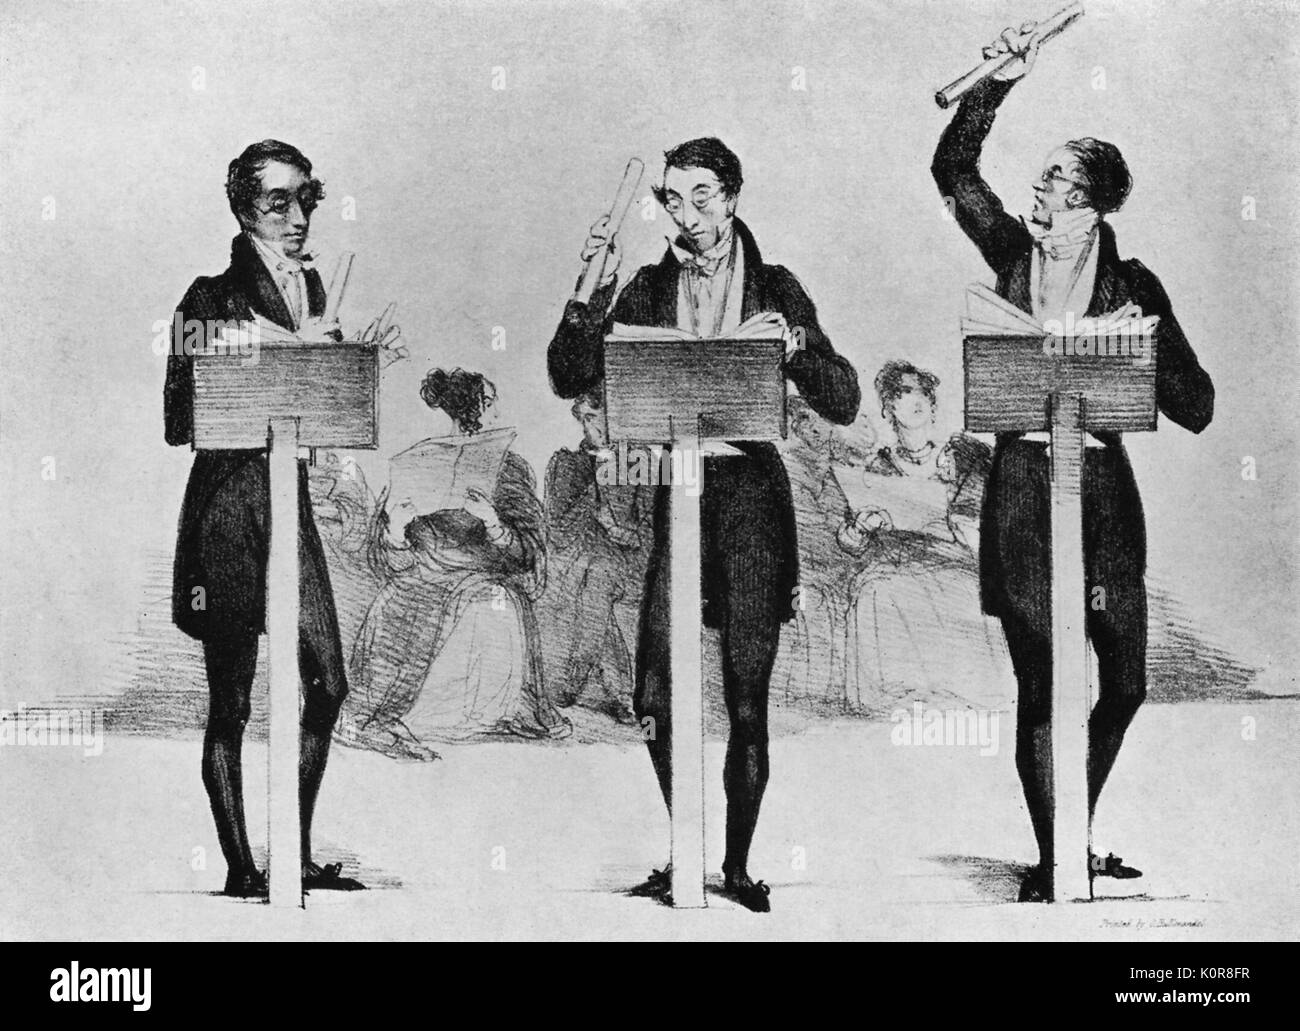 Carl Maria von Weber conducting in London by J. Hayter 1826.  German composer and conductor, 18 November 1786 - 5 June 1826. Stock Photo